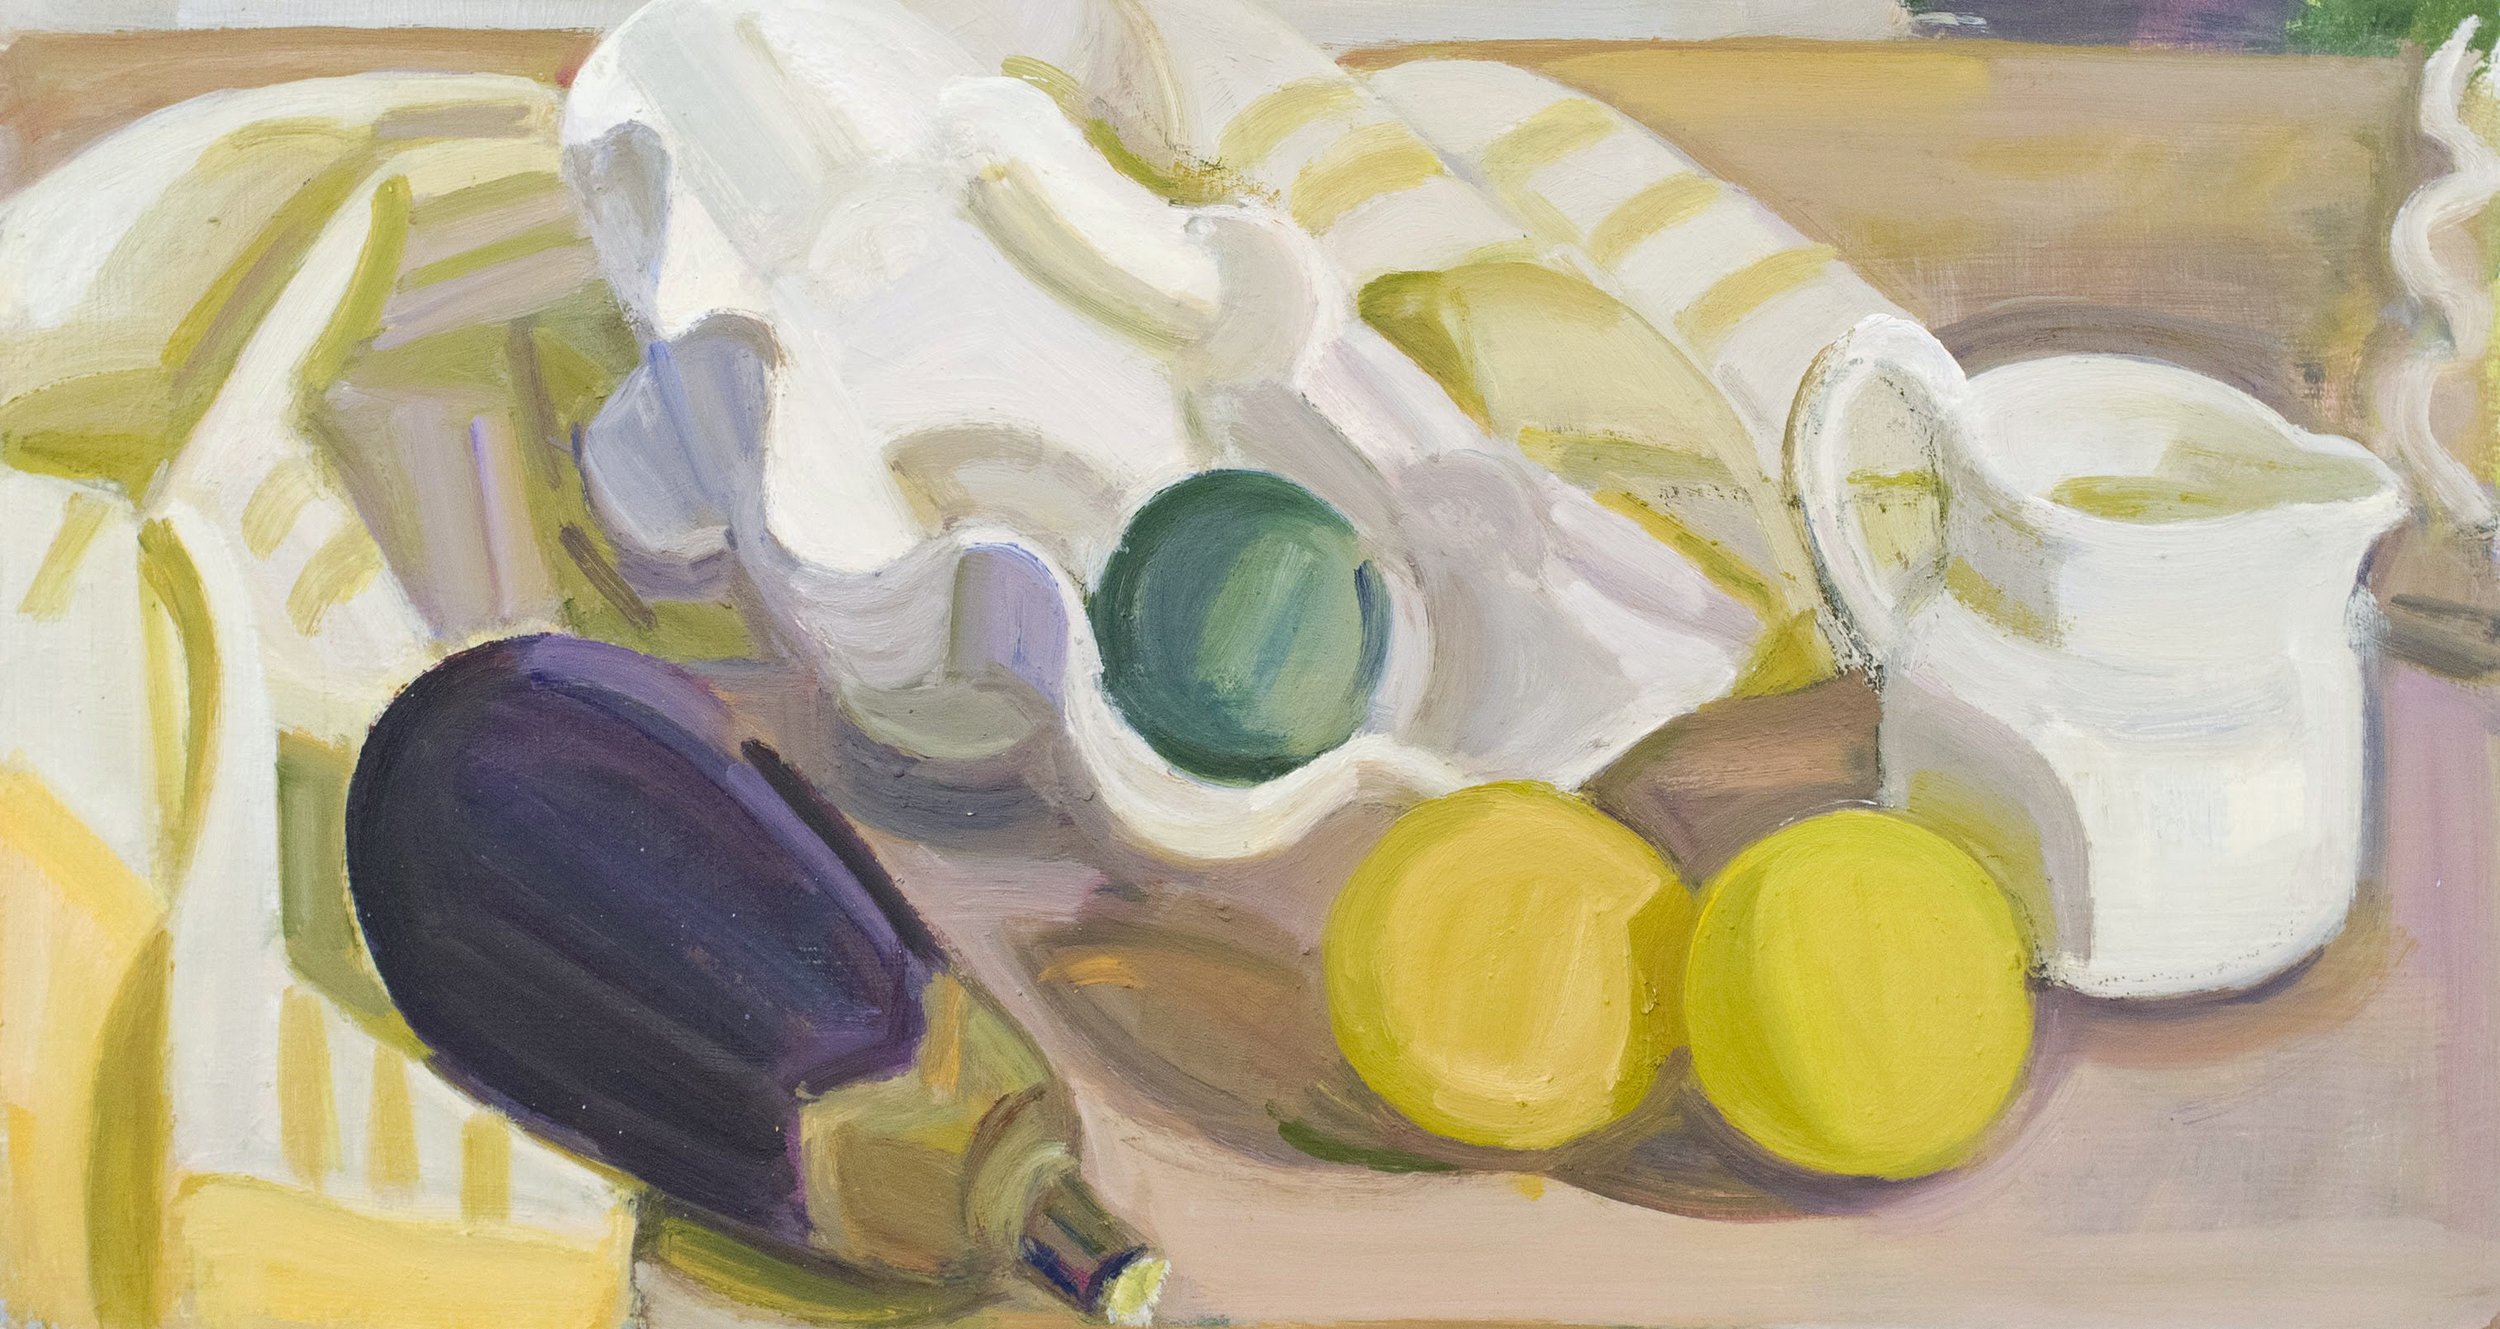   Eggplant, Shell, Lime and Lemons with Small Creamer , 2018, oil/panel, 10 x 18 in. (Private collection) 